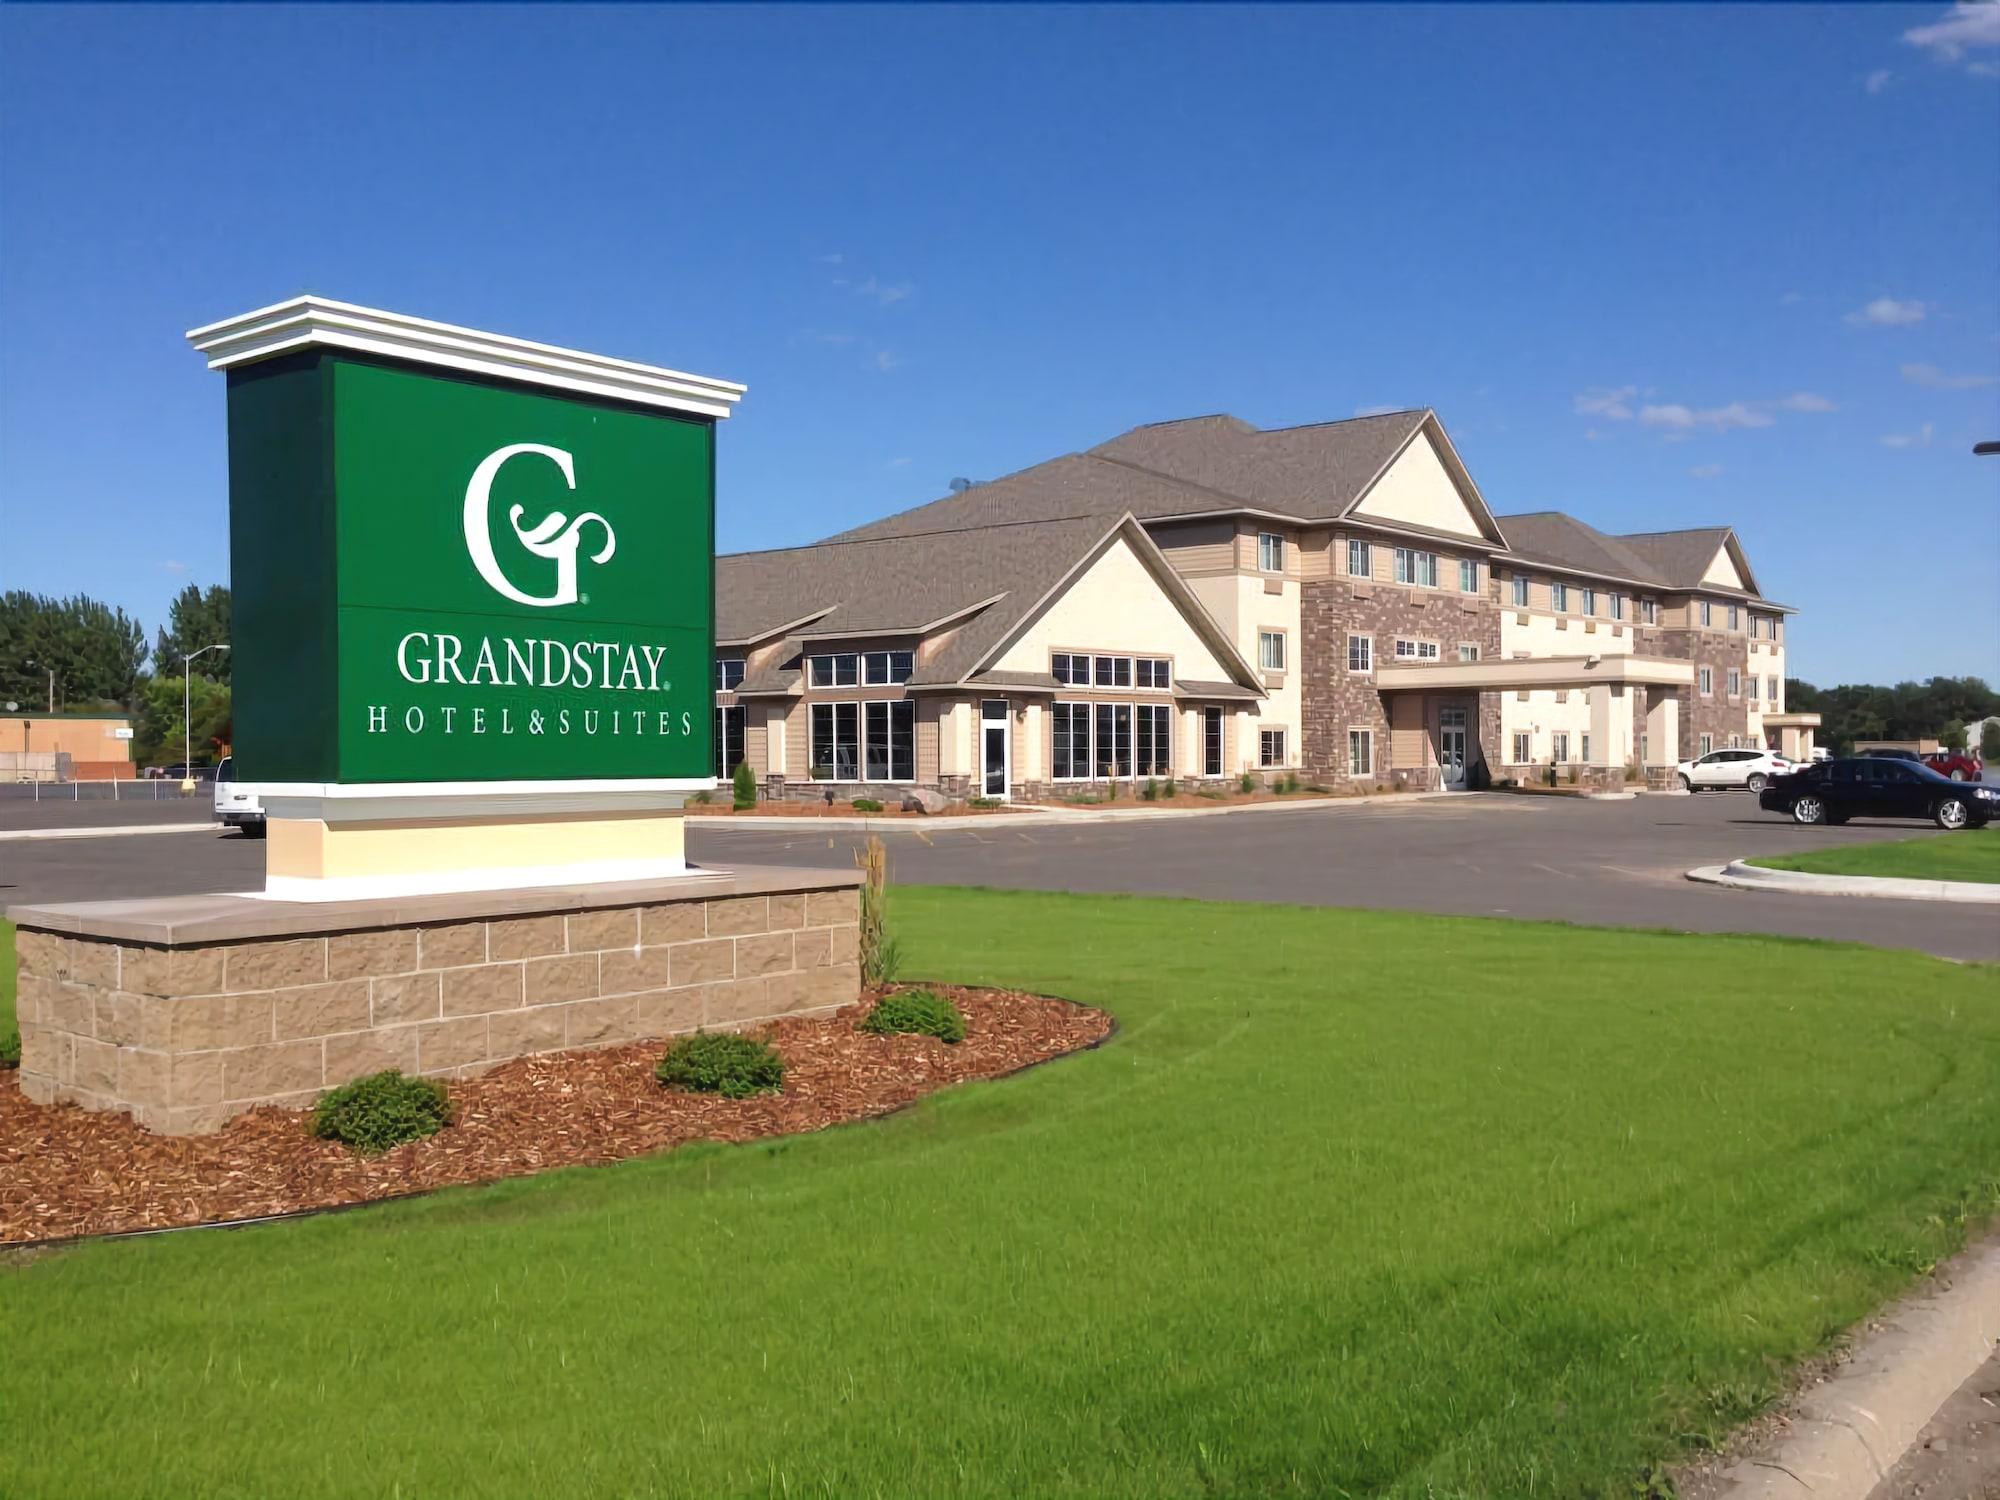 GrandStay Hotel & Suites Thief River Falls image